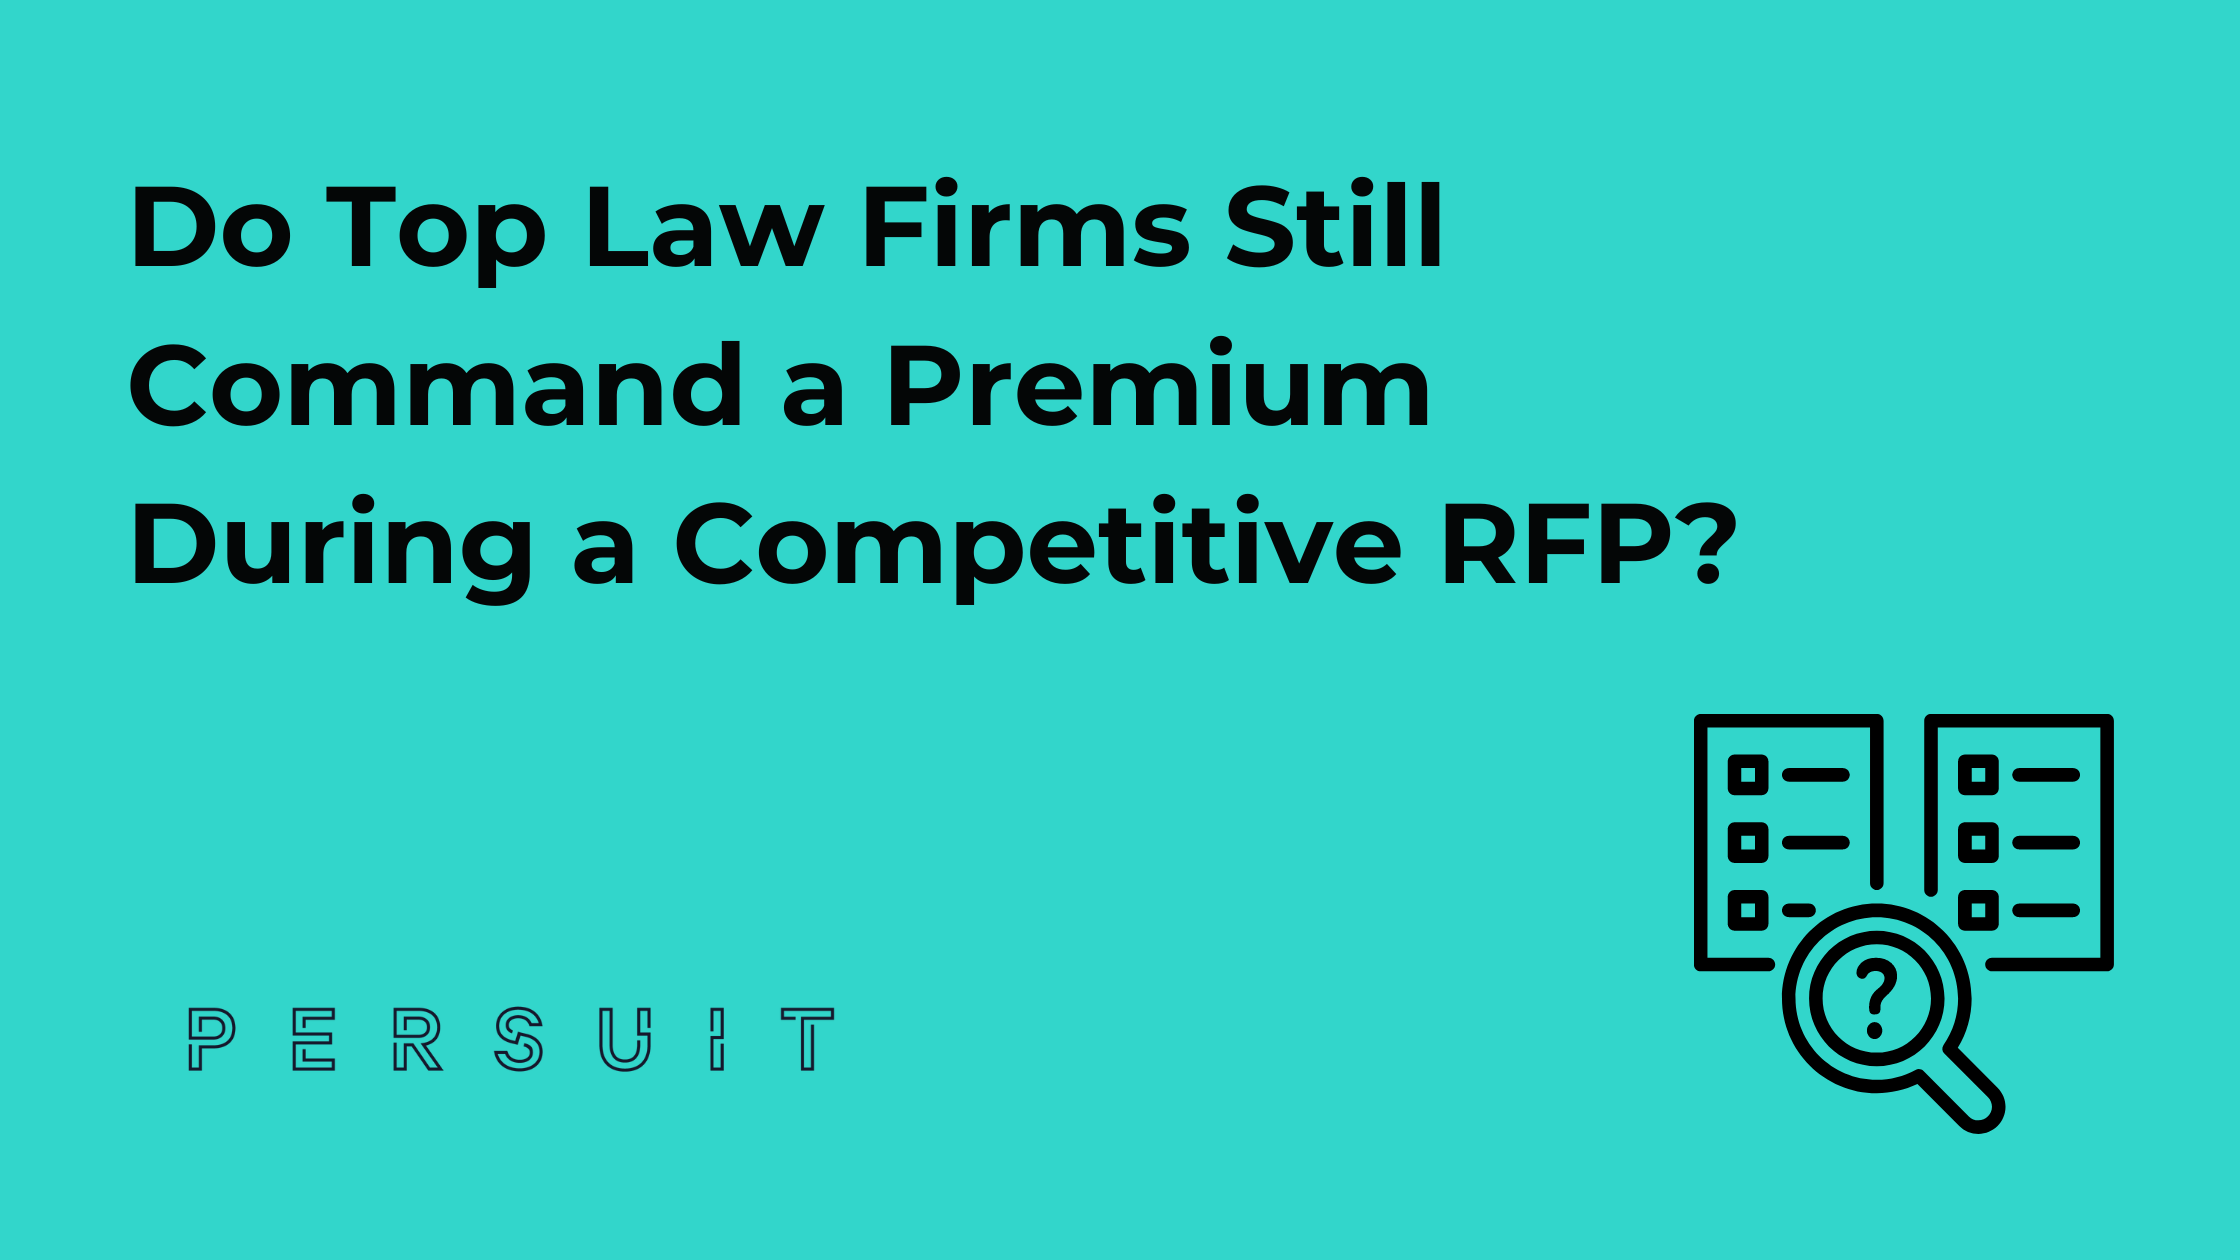 Do Top Law Firms Still Command a Premium During a Competitive RFP?